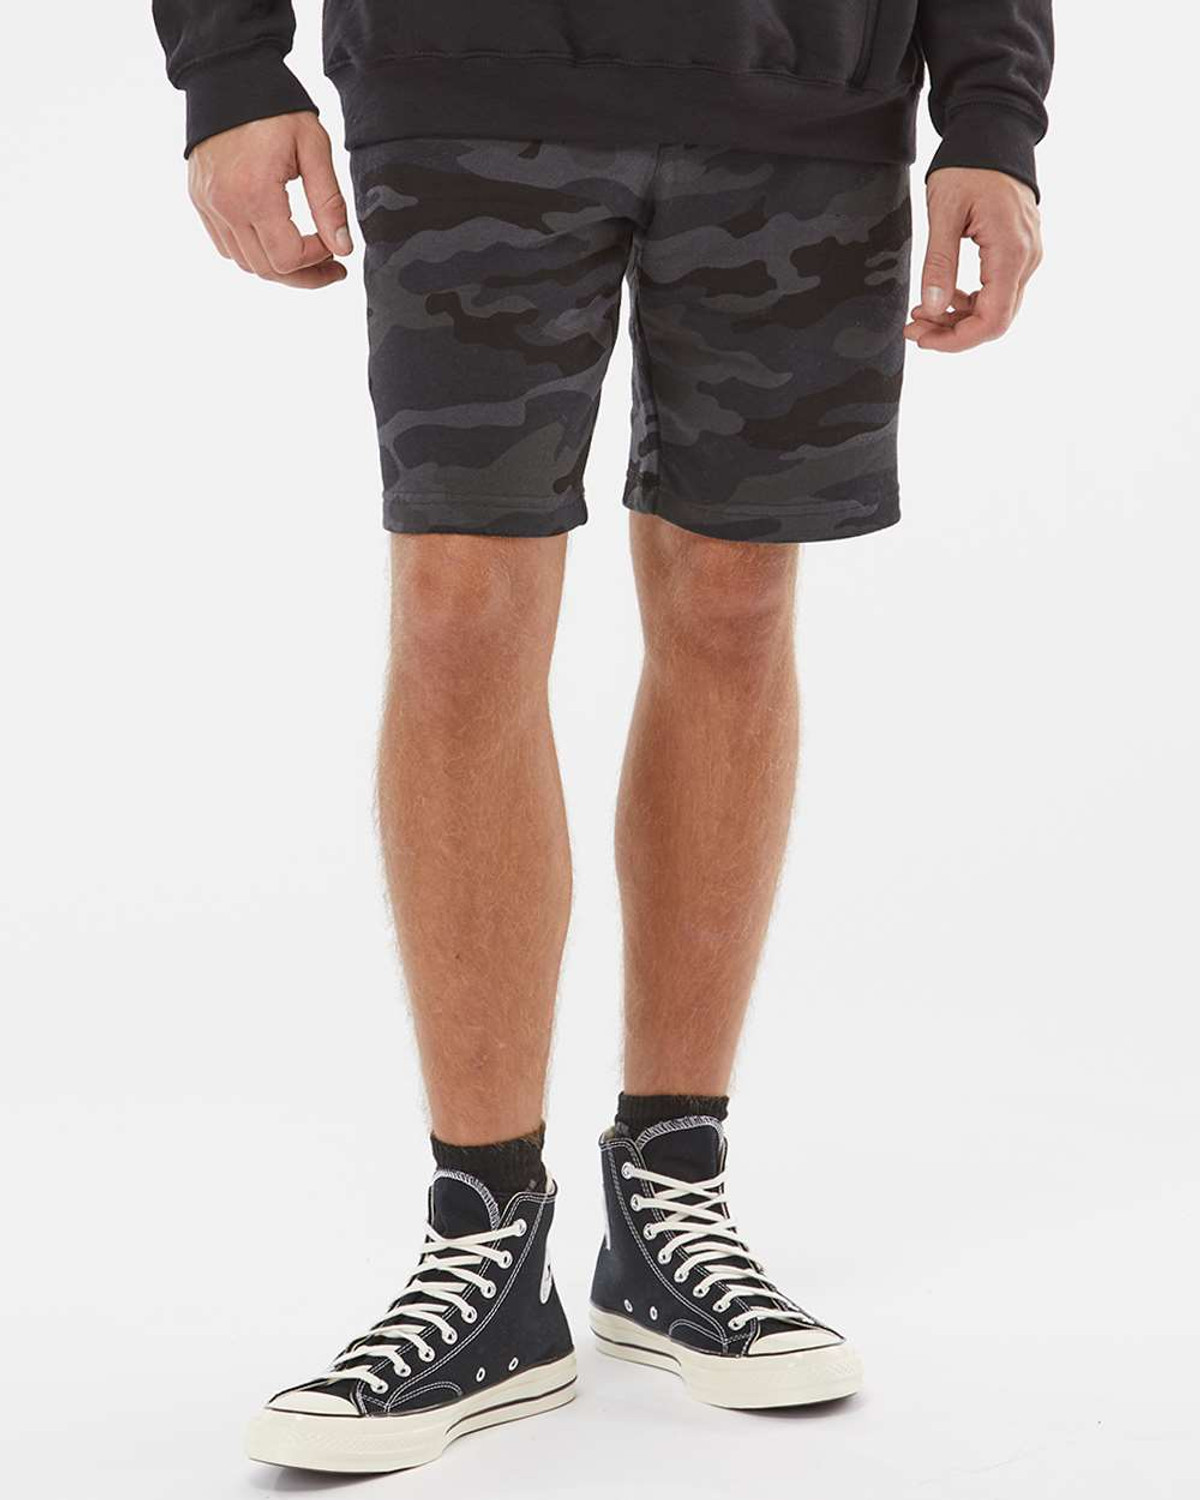 https://cdn11.bigcommerce.com/s-405b0/images/stencil/1500x1500/products/1226/18350/ind20srt-independent-trading-shorts-t-shirt.ca-black-camo__85810.1643402282.jpg?c=2?imbypass=on